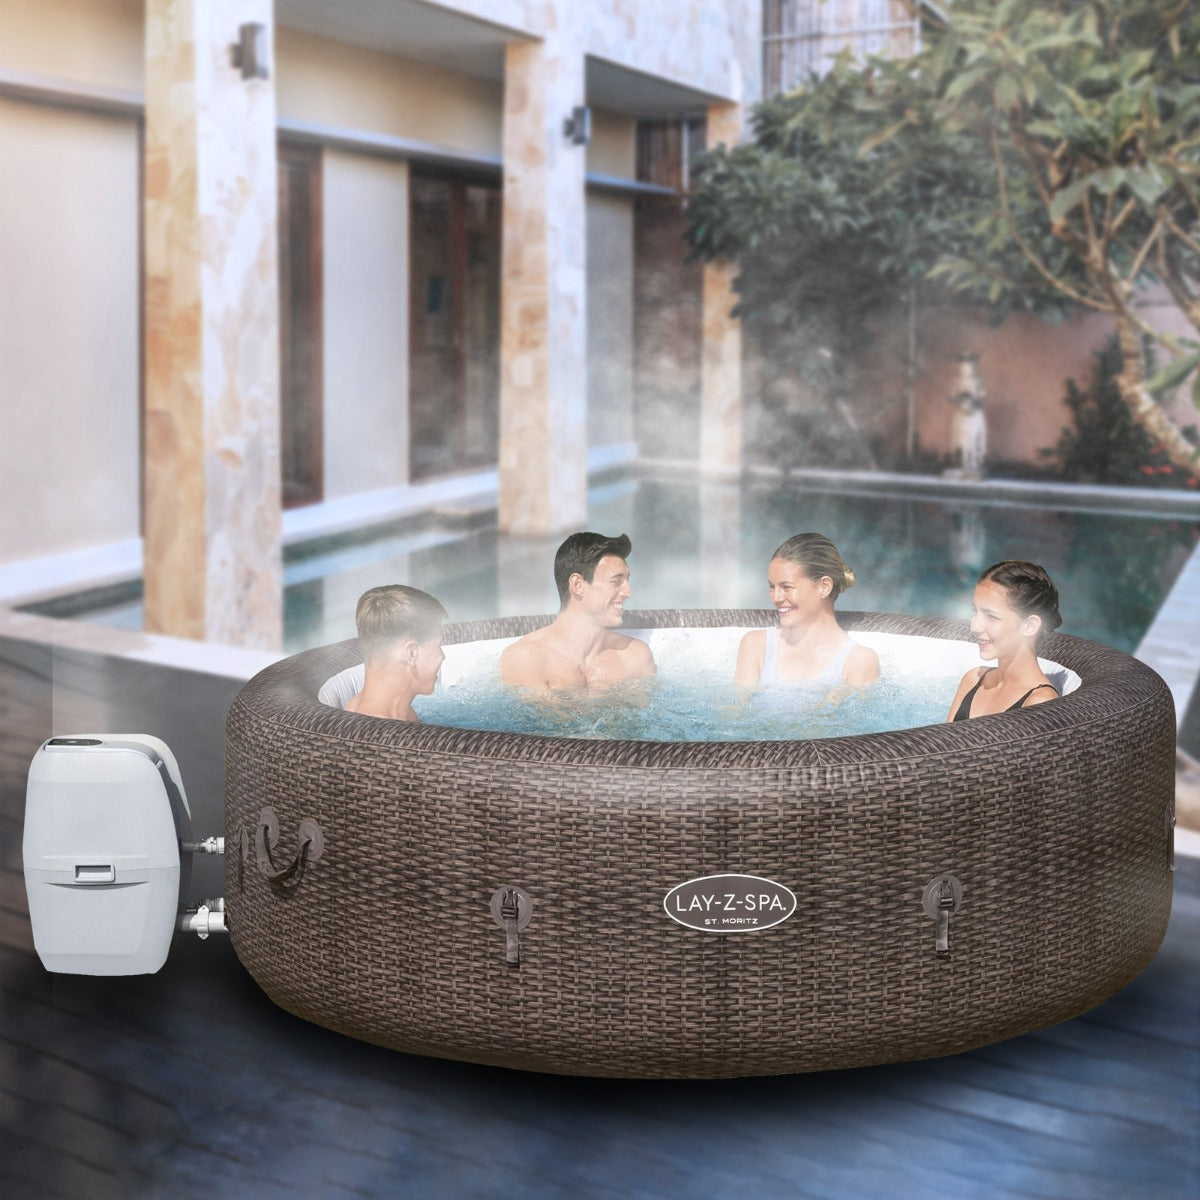 Hot Tub Lay Spa Gigantic! St. | Z Outbax Moritz Bestway Heated